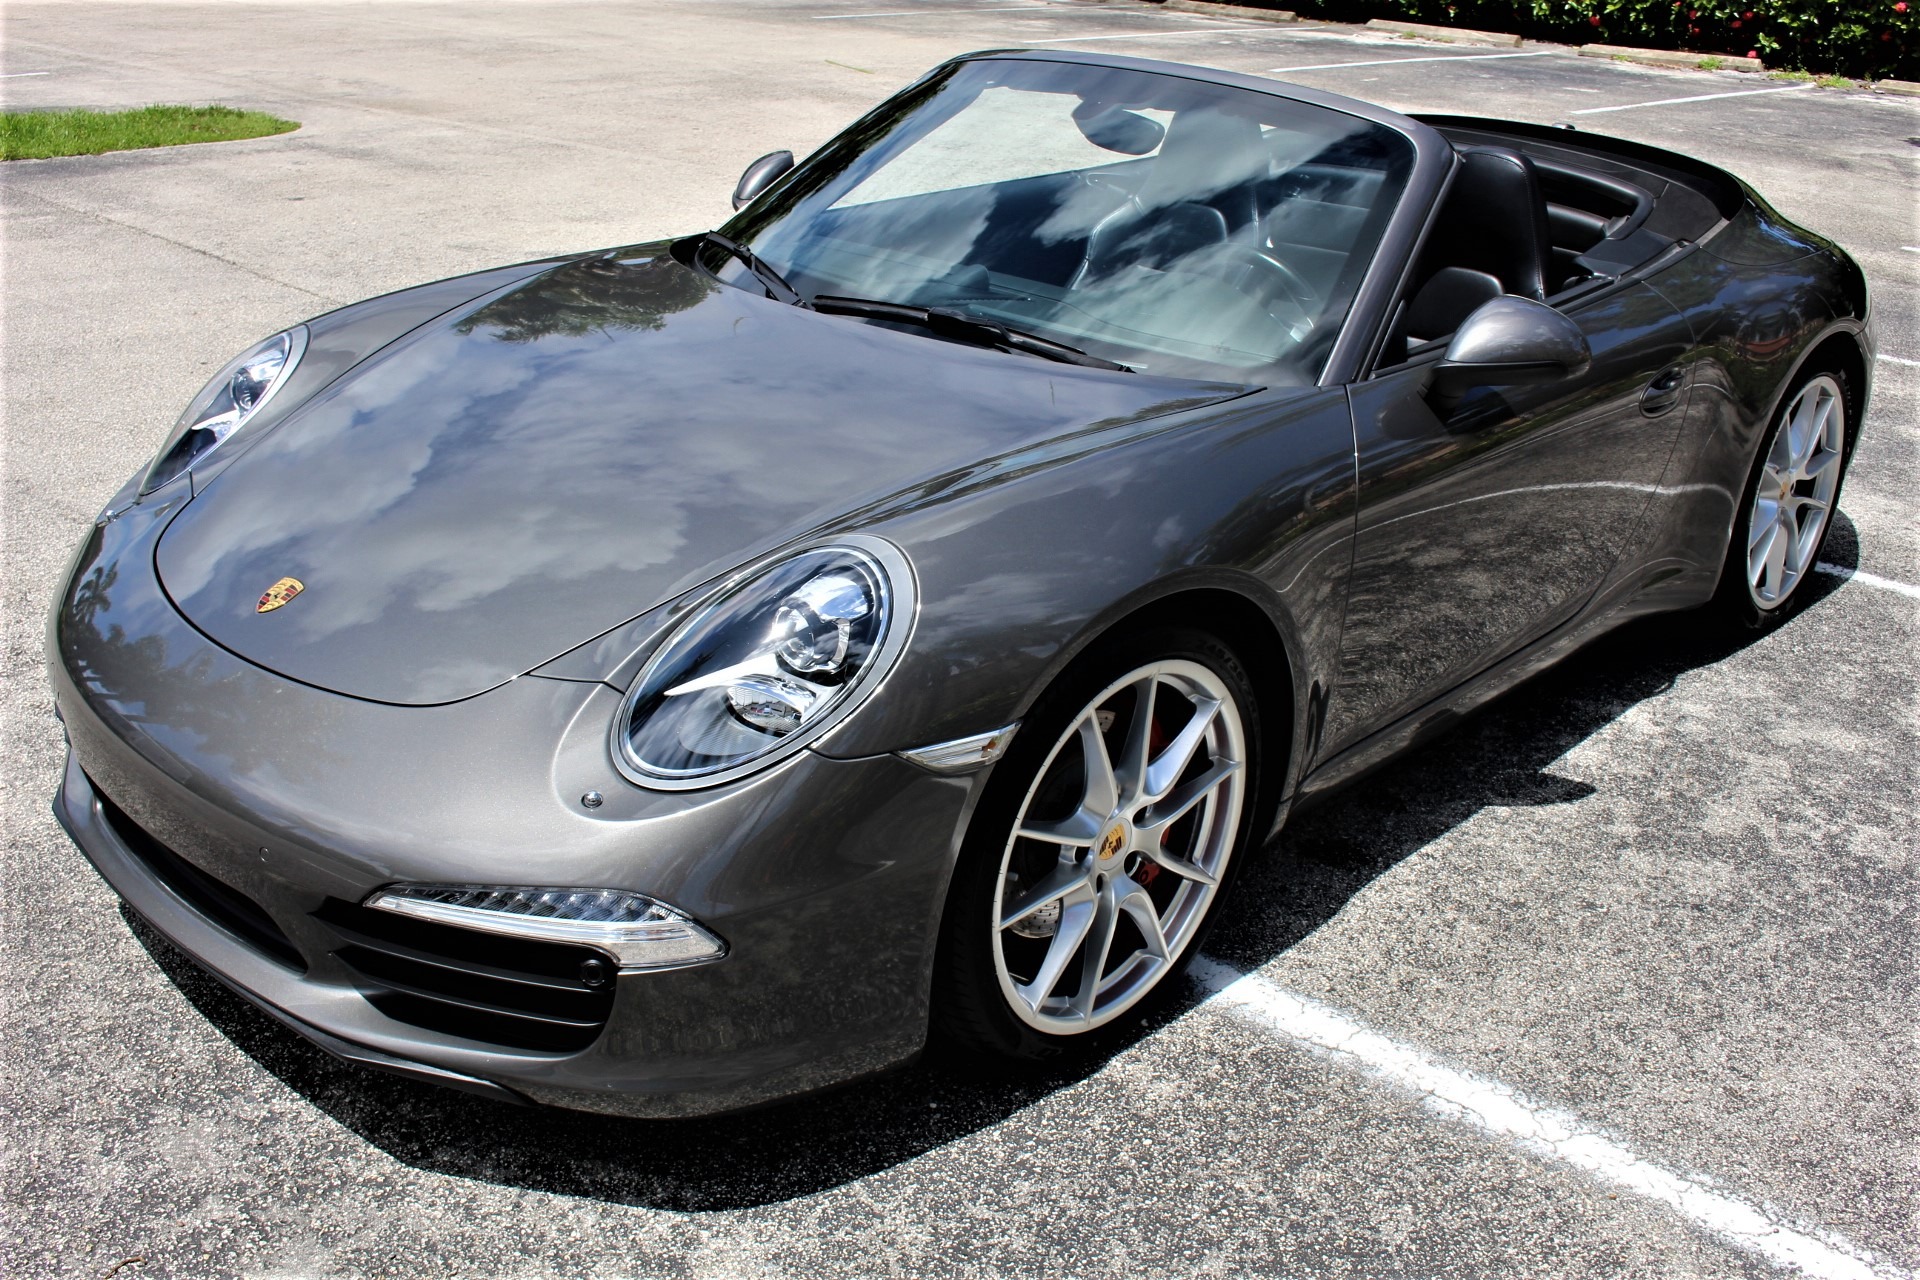 Used 2013 Porsche 911 Carrera S for sale Sold at The Gables Sports Cars in Miami FL 33146 4